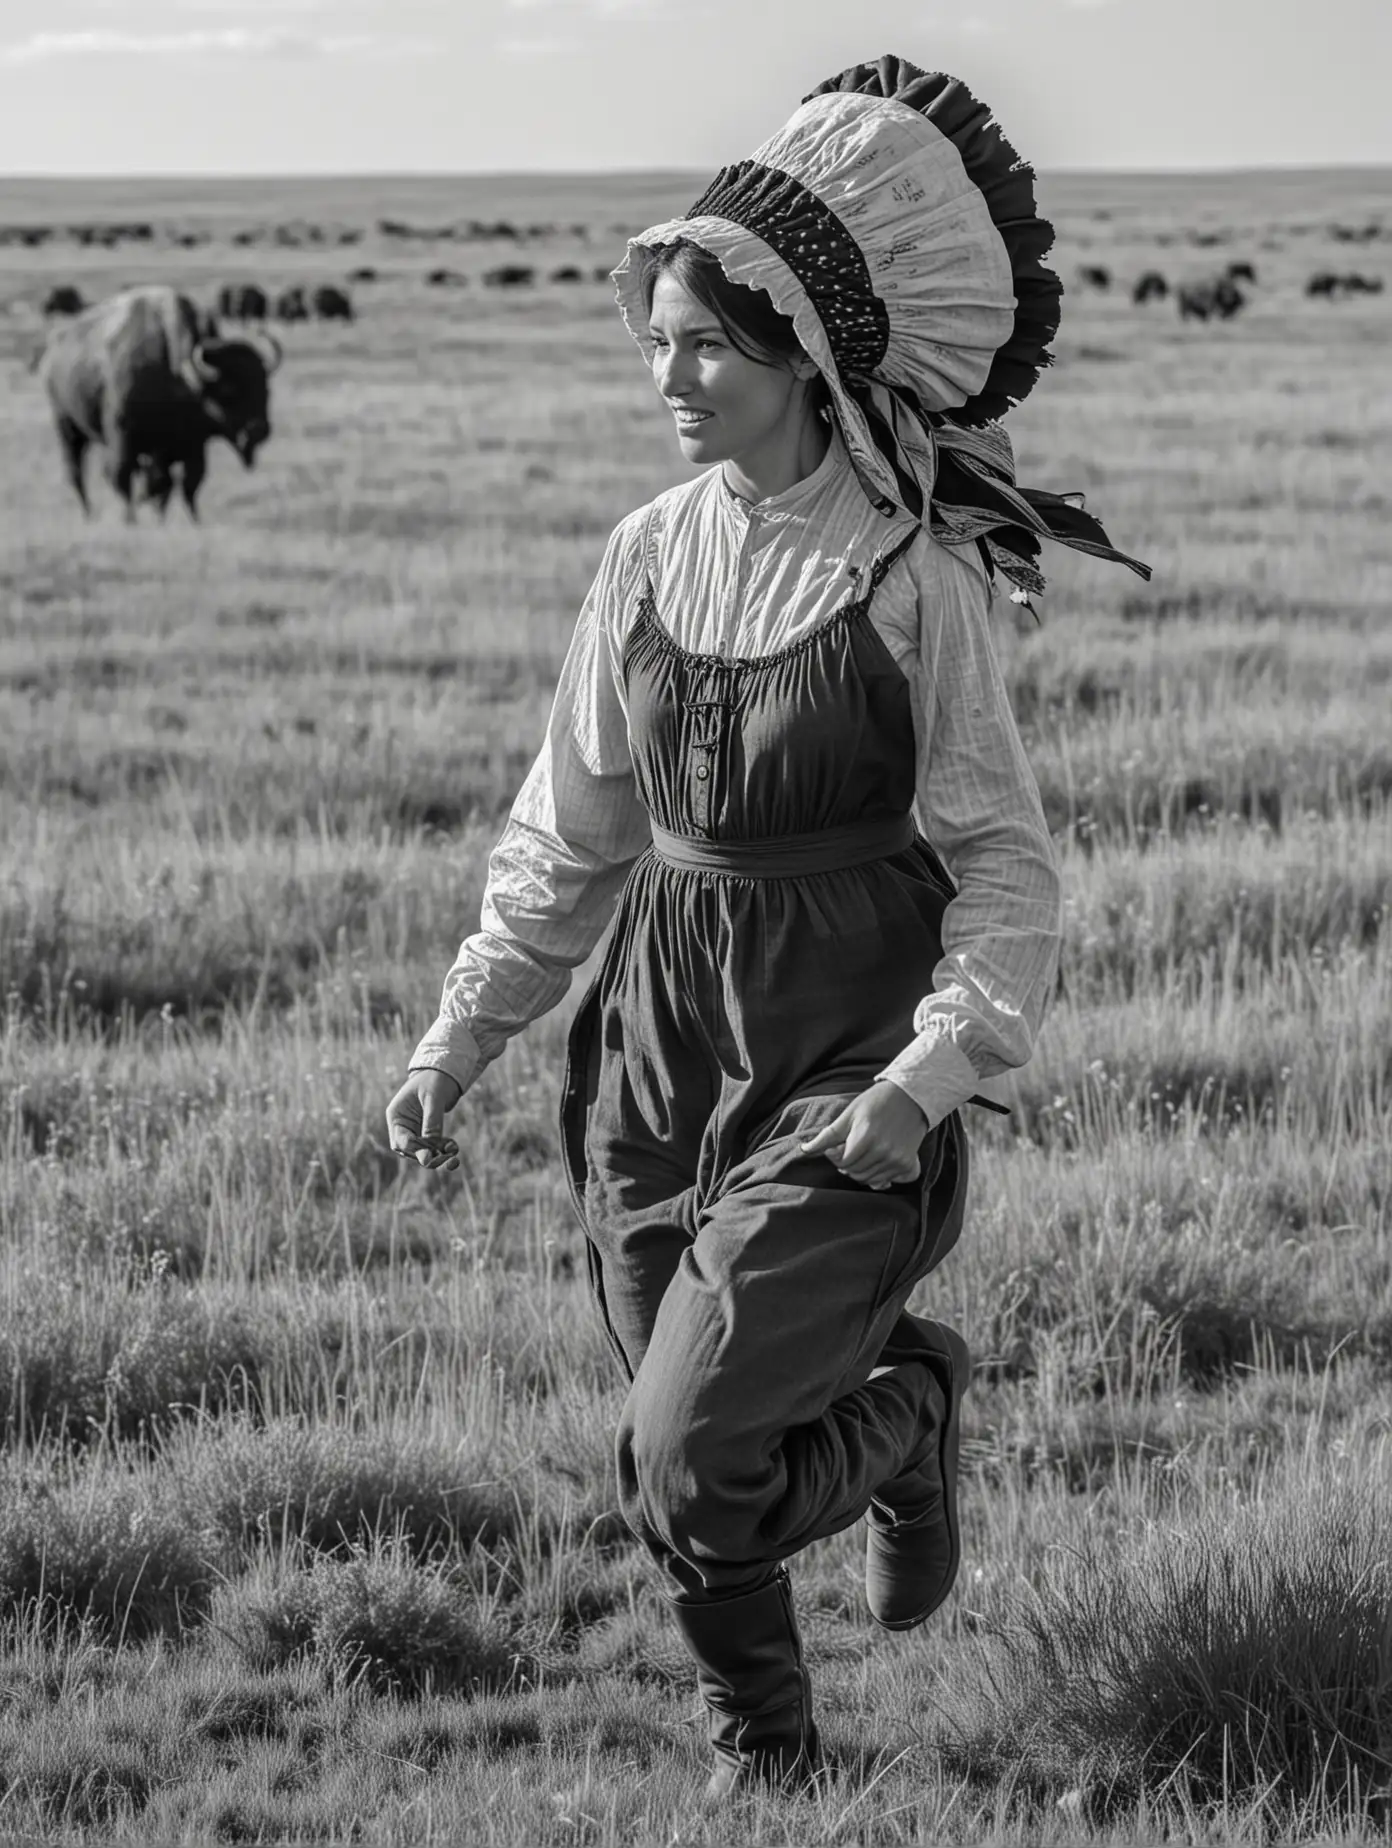 American Pioneer Woman Running on Prairie with Buffalo in Black and White